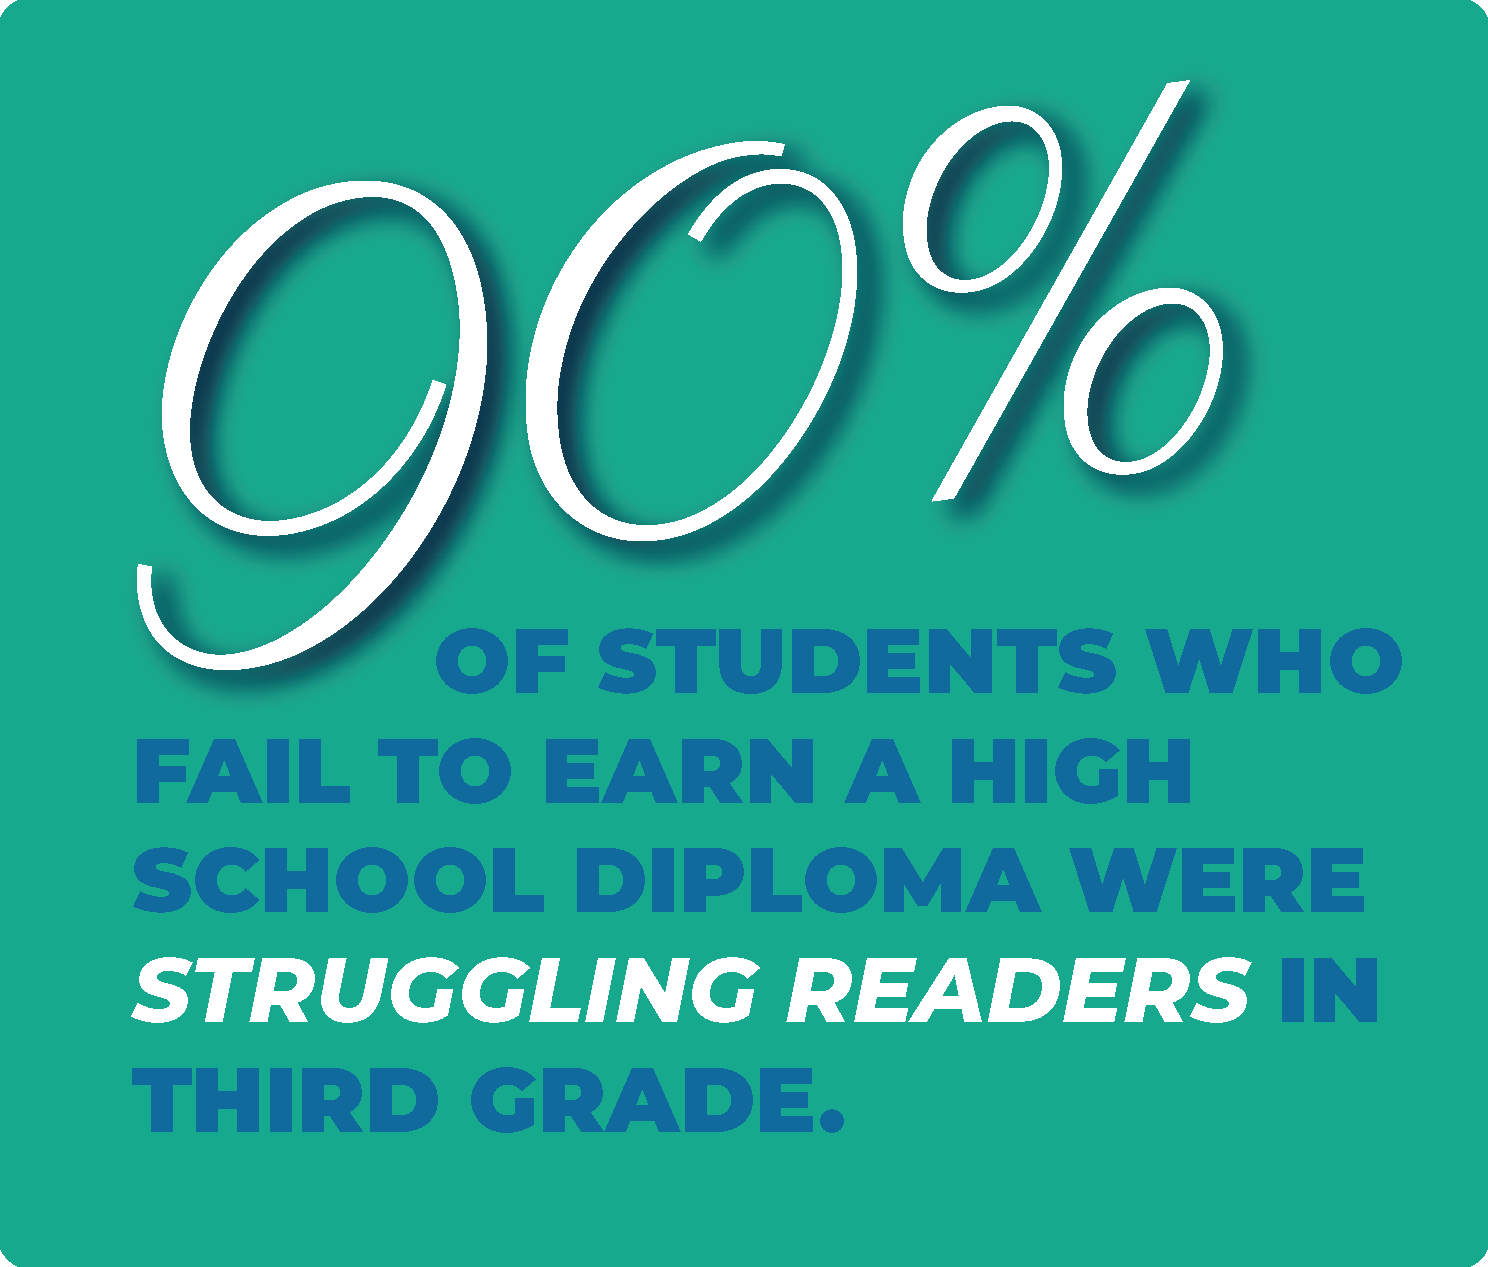 90% of students who fail to earn a high school diploma were struggling readers in third grade.